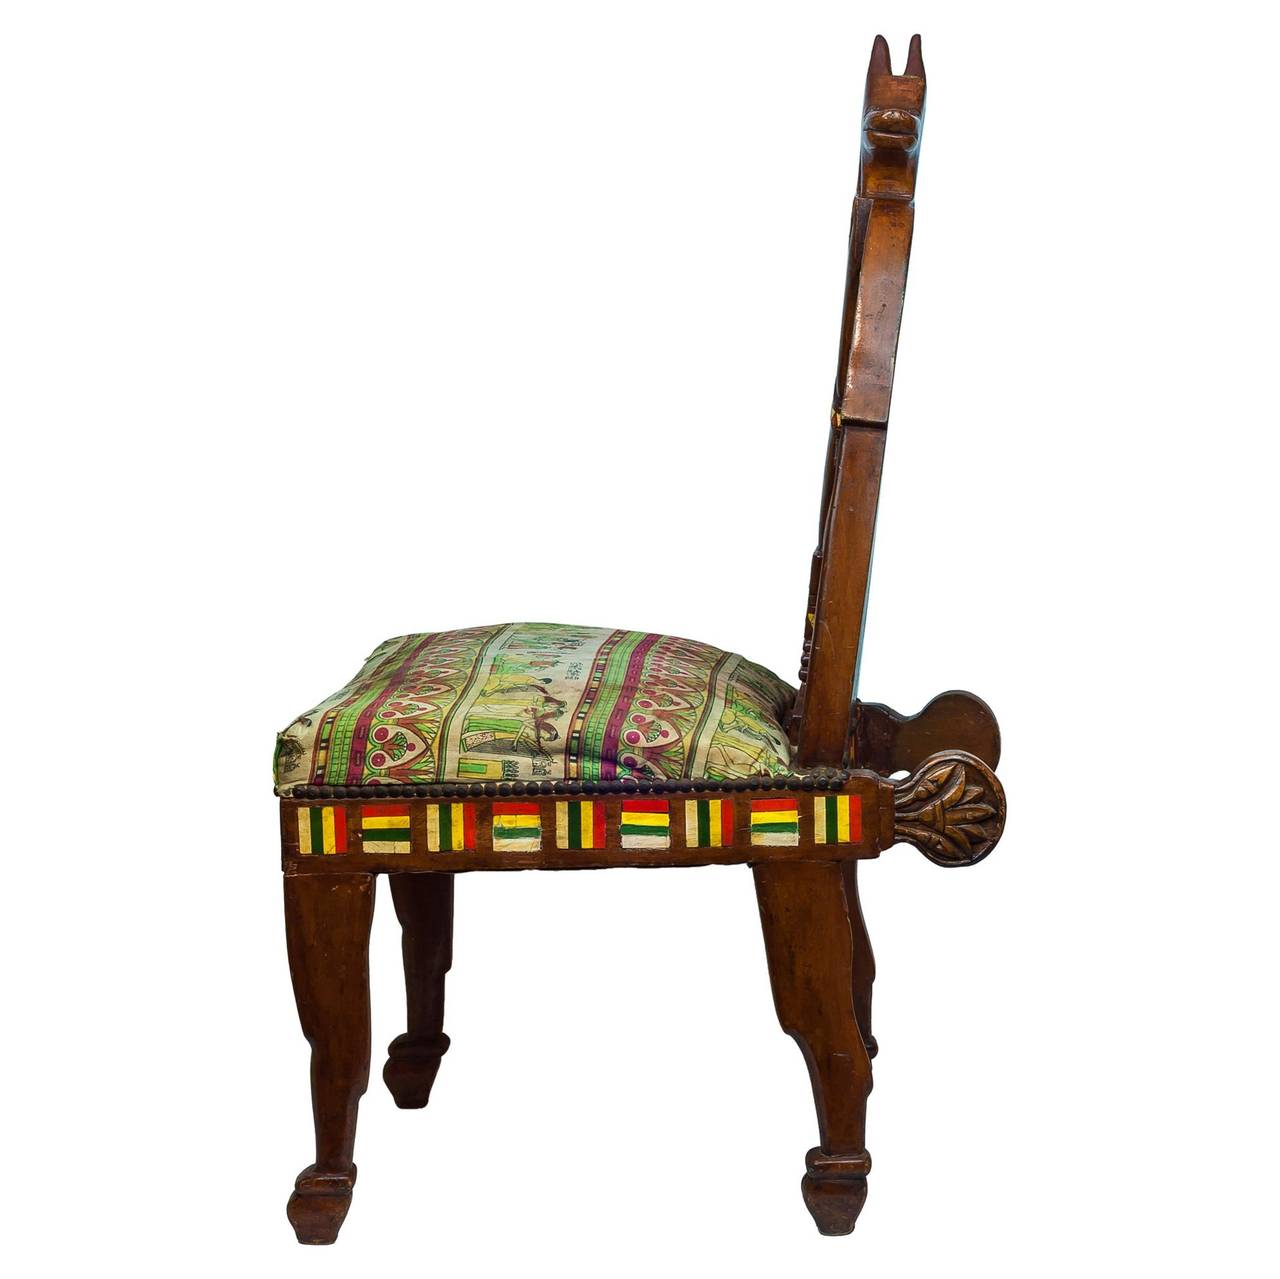 Unusual Egyptian revival inlaid figural side chair.
Stock Number: F9